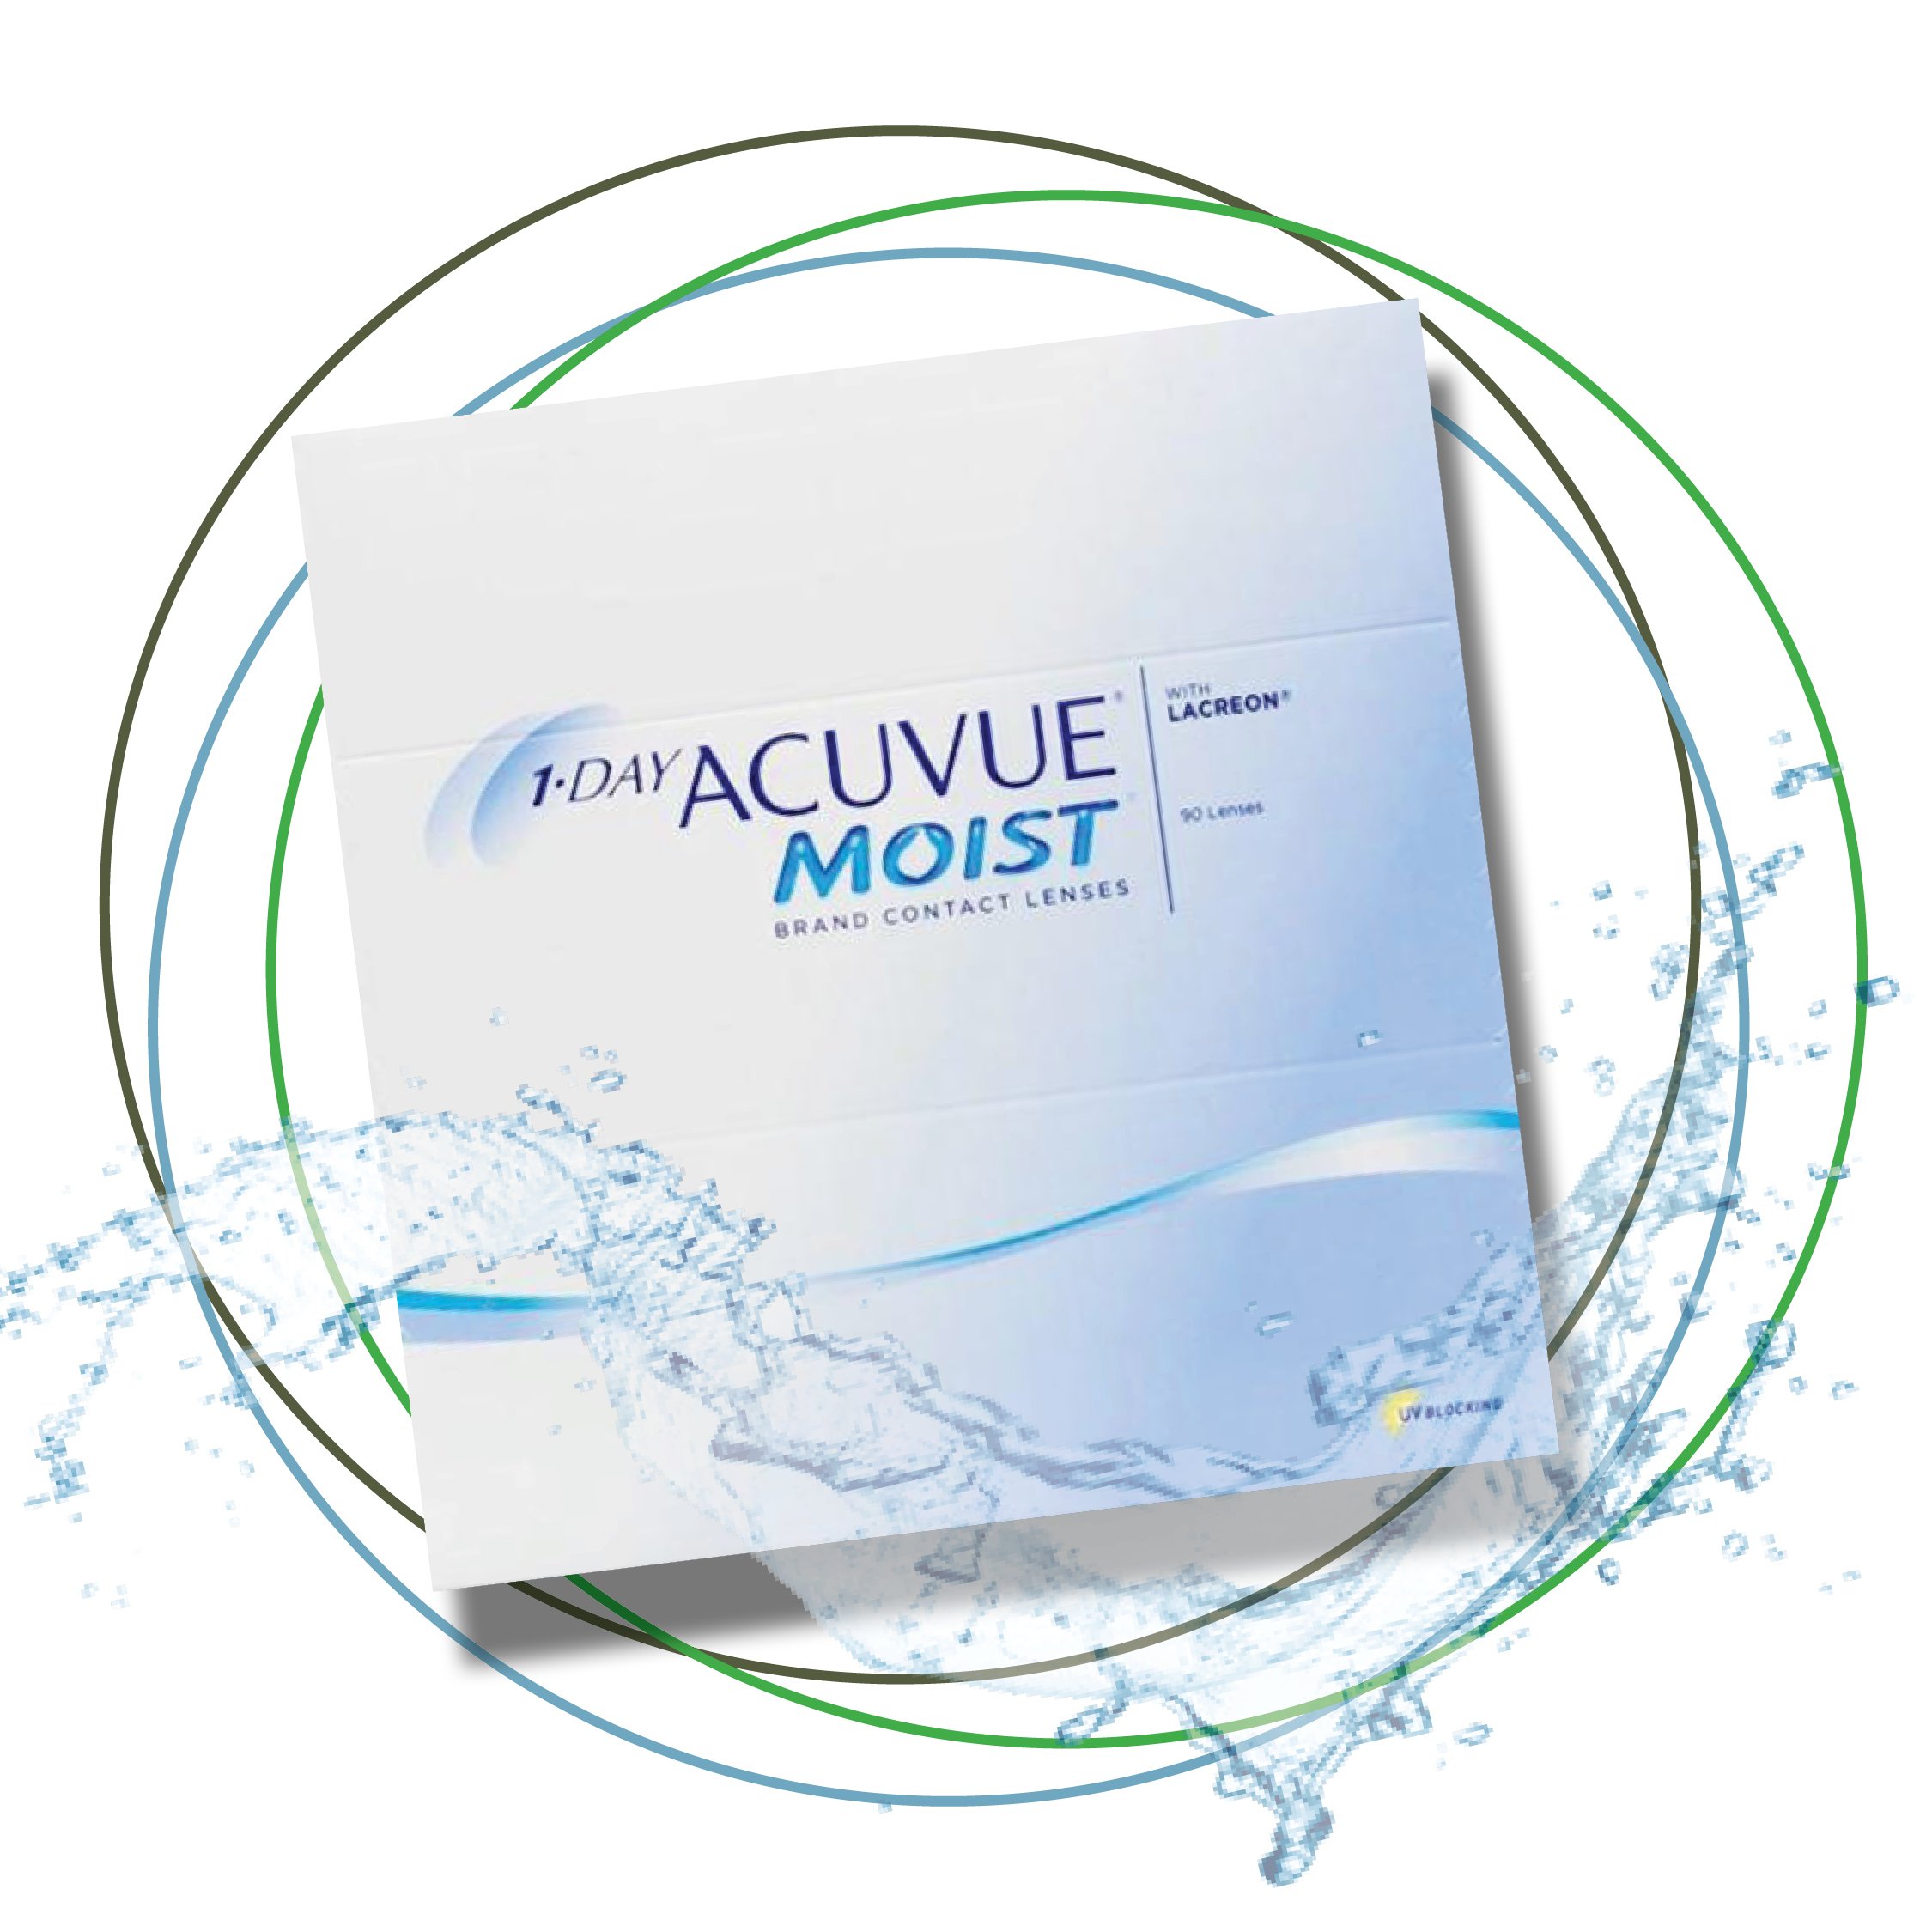 1-day-acuvue-moist-90-pack-eye-online-contact-lenses